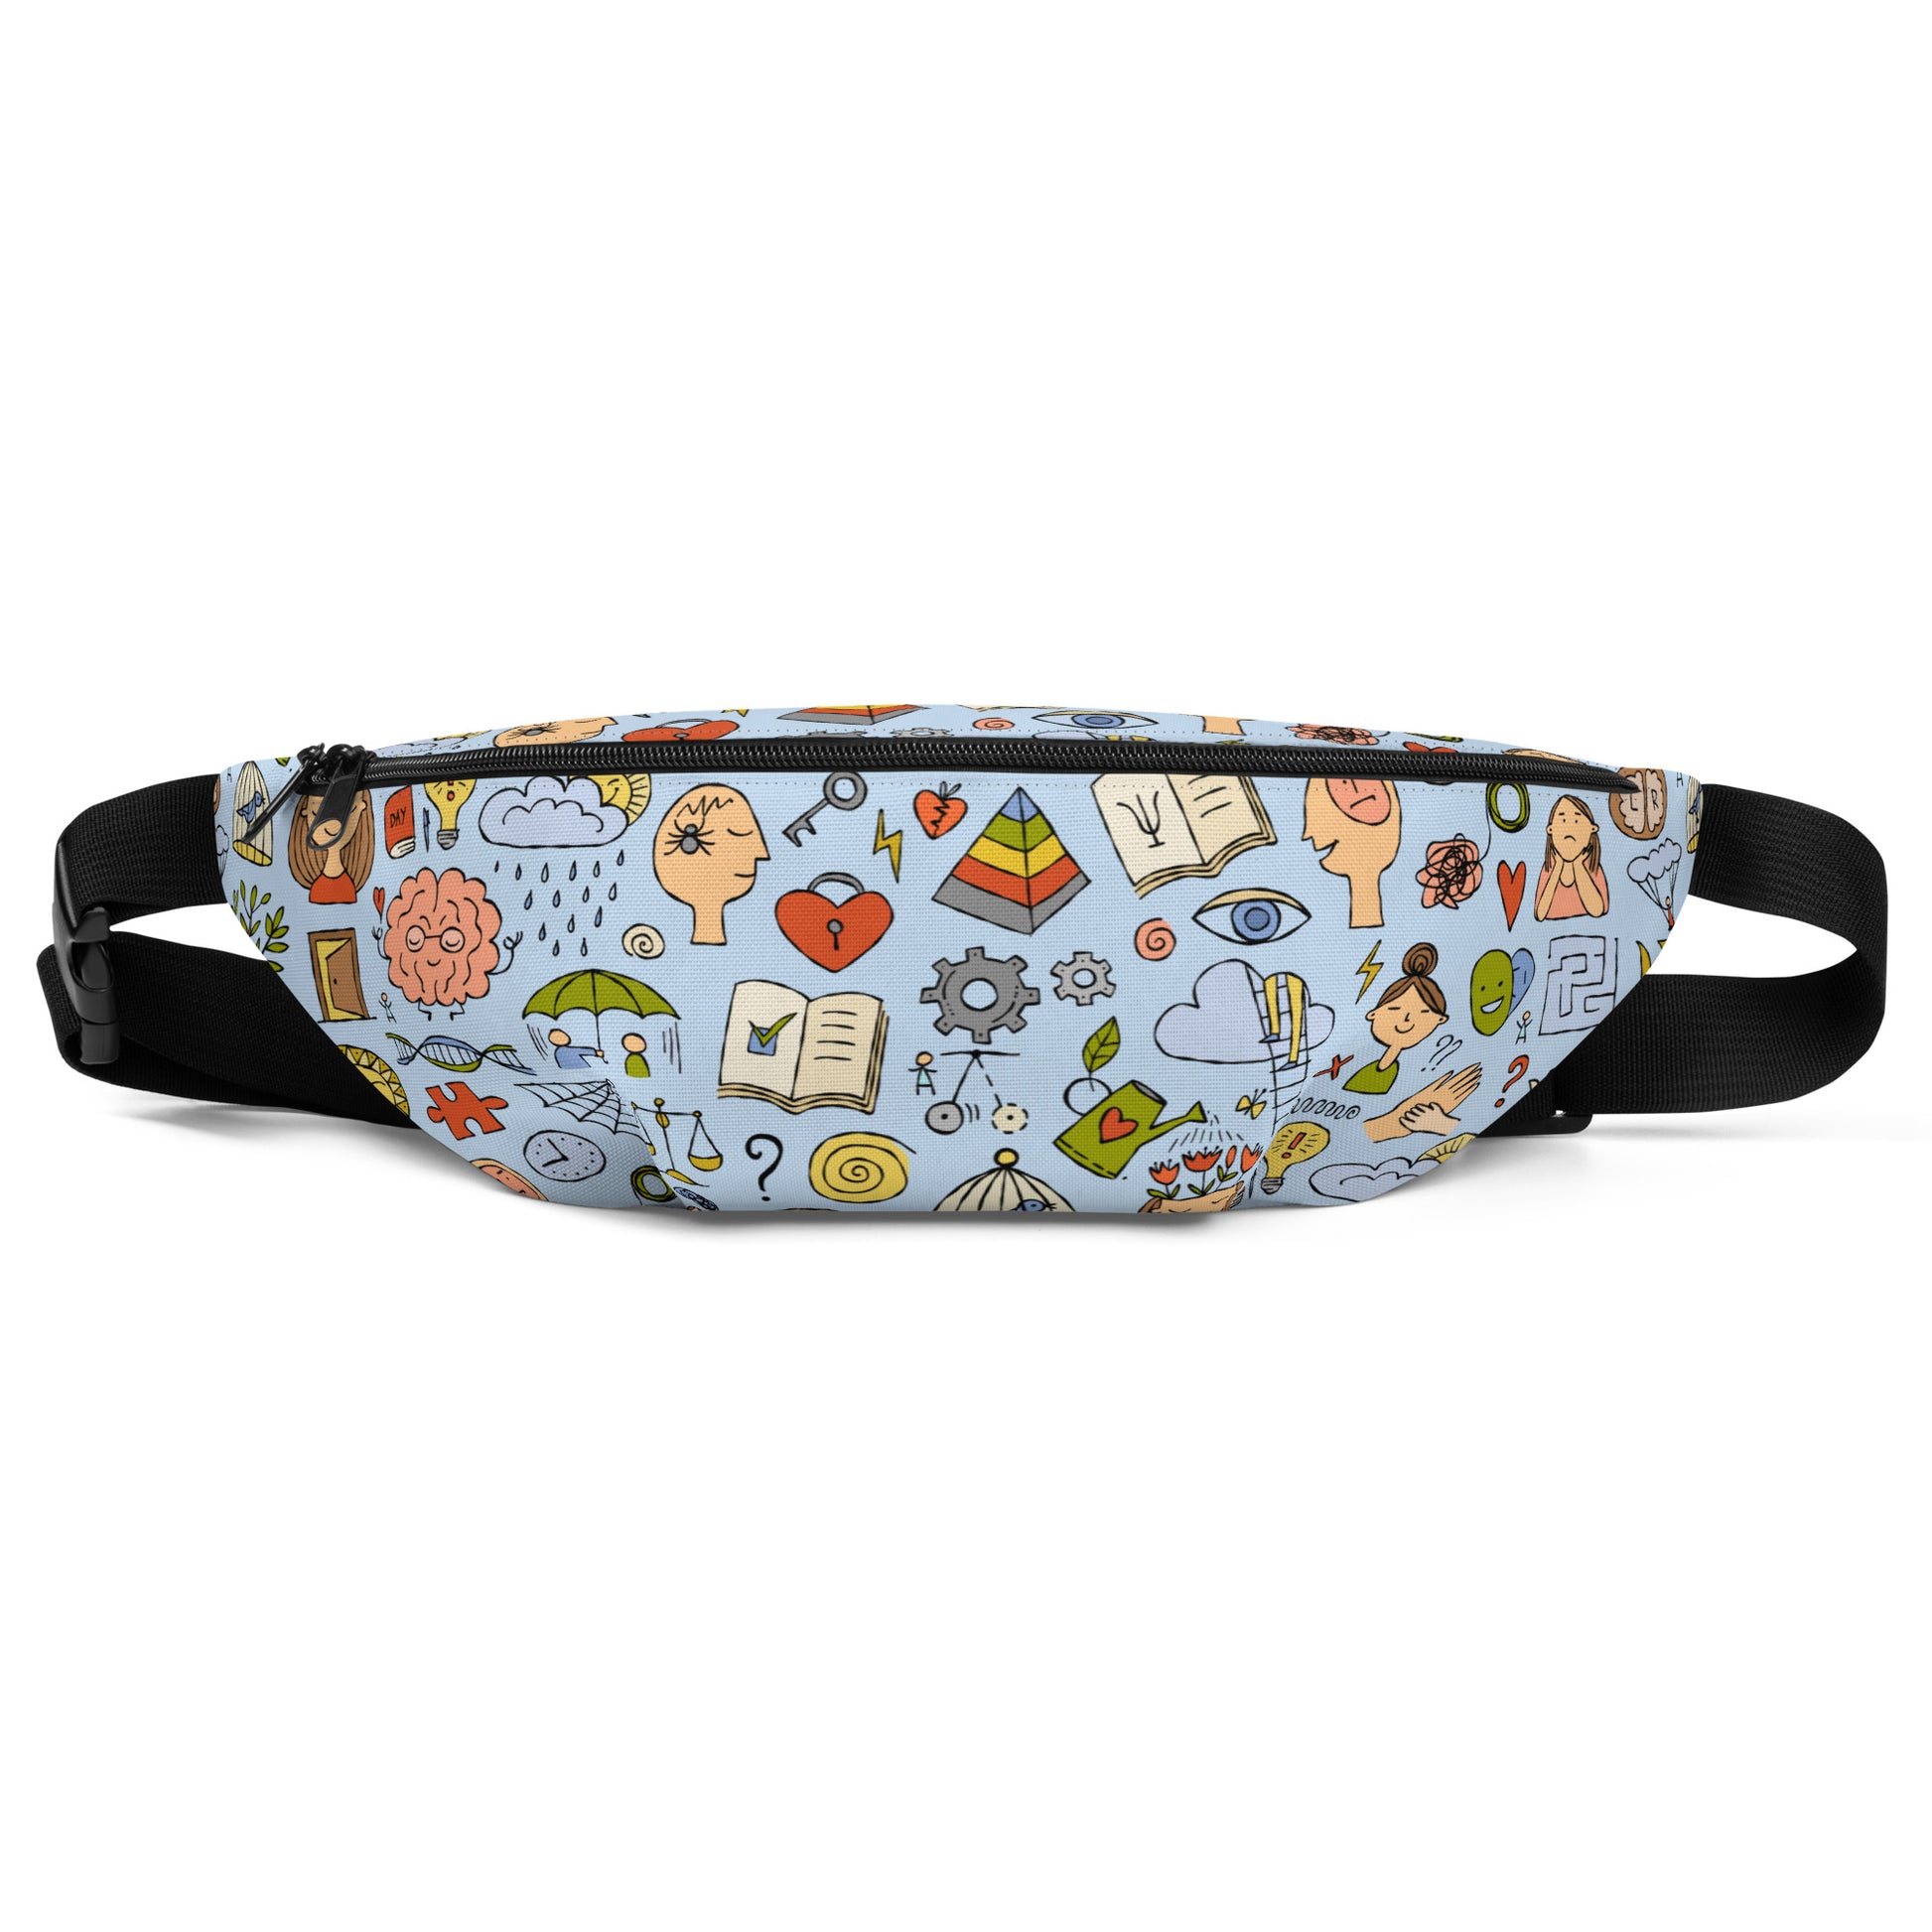 Waist Bag with funny psychology print. Front view